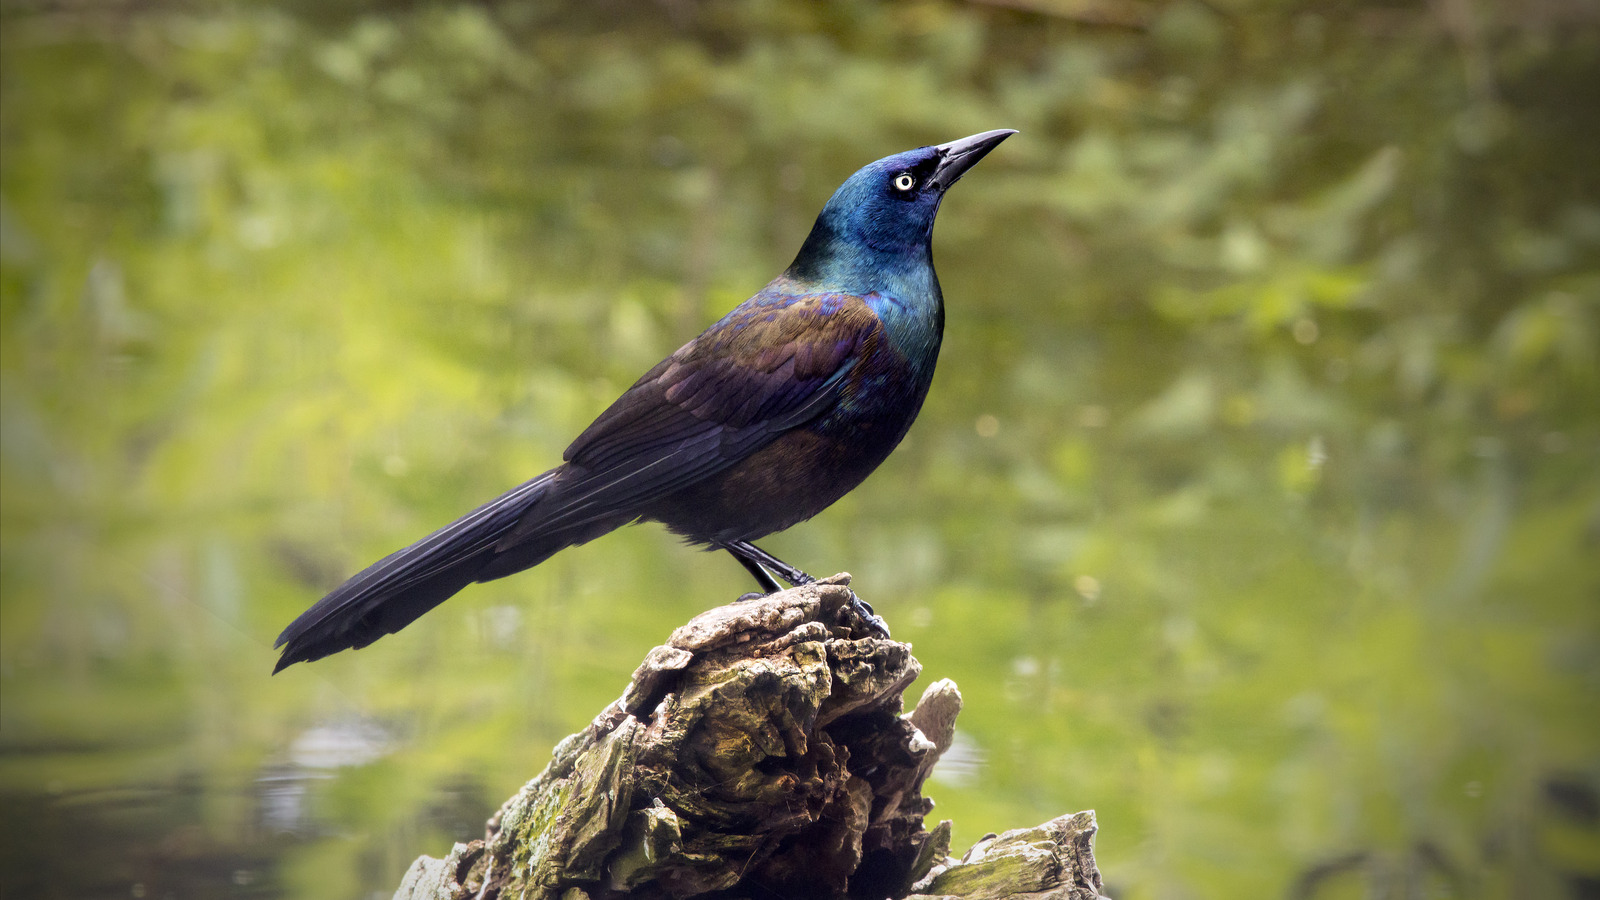 Why The Common Grackle Isn't A Bird Breed You'll Want In Your Back Yard